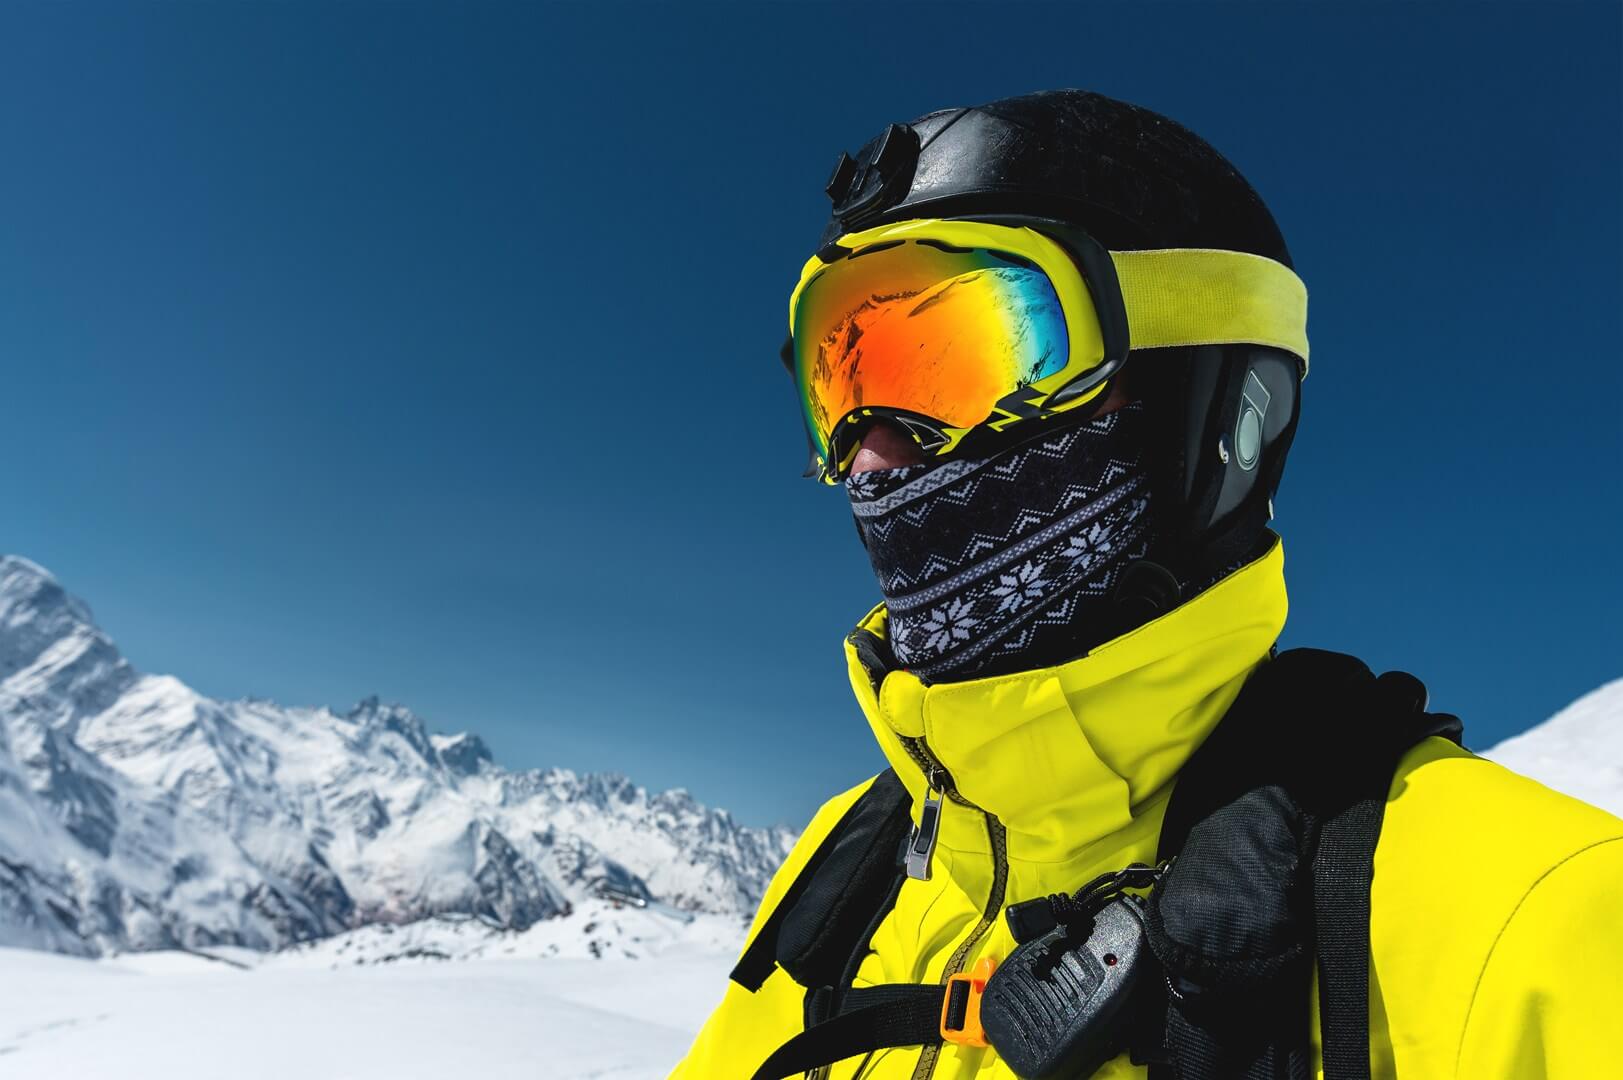 Bare jet volatility Get Your "Eye" On The Best Snowboard Goggles / Ski Eyewear Out There